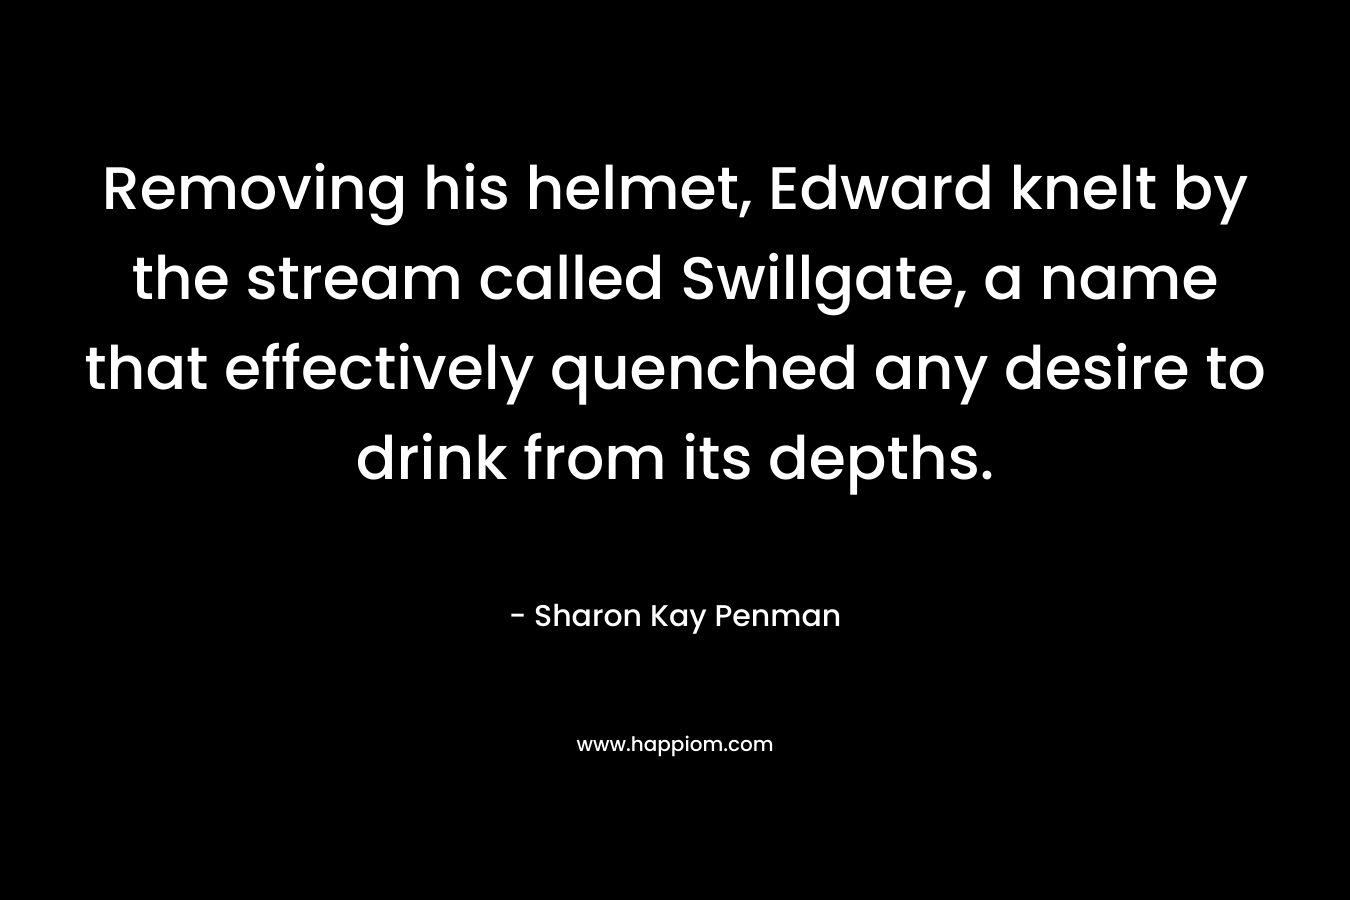 Removing his helmet, Edward knelt by the stream called Swillgate, a name that effectively quenched any desire to drink from its depths. – Sharon Kay Penman